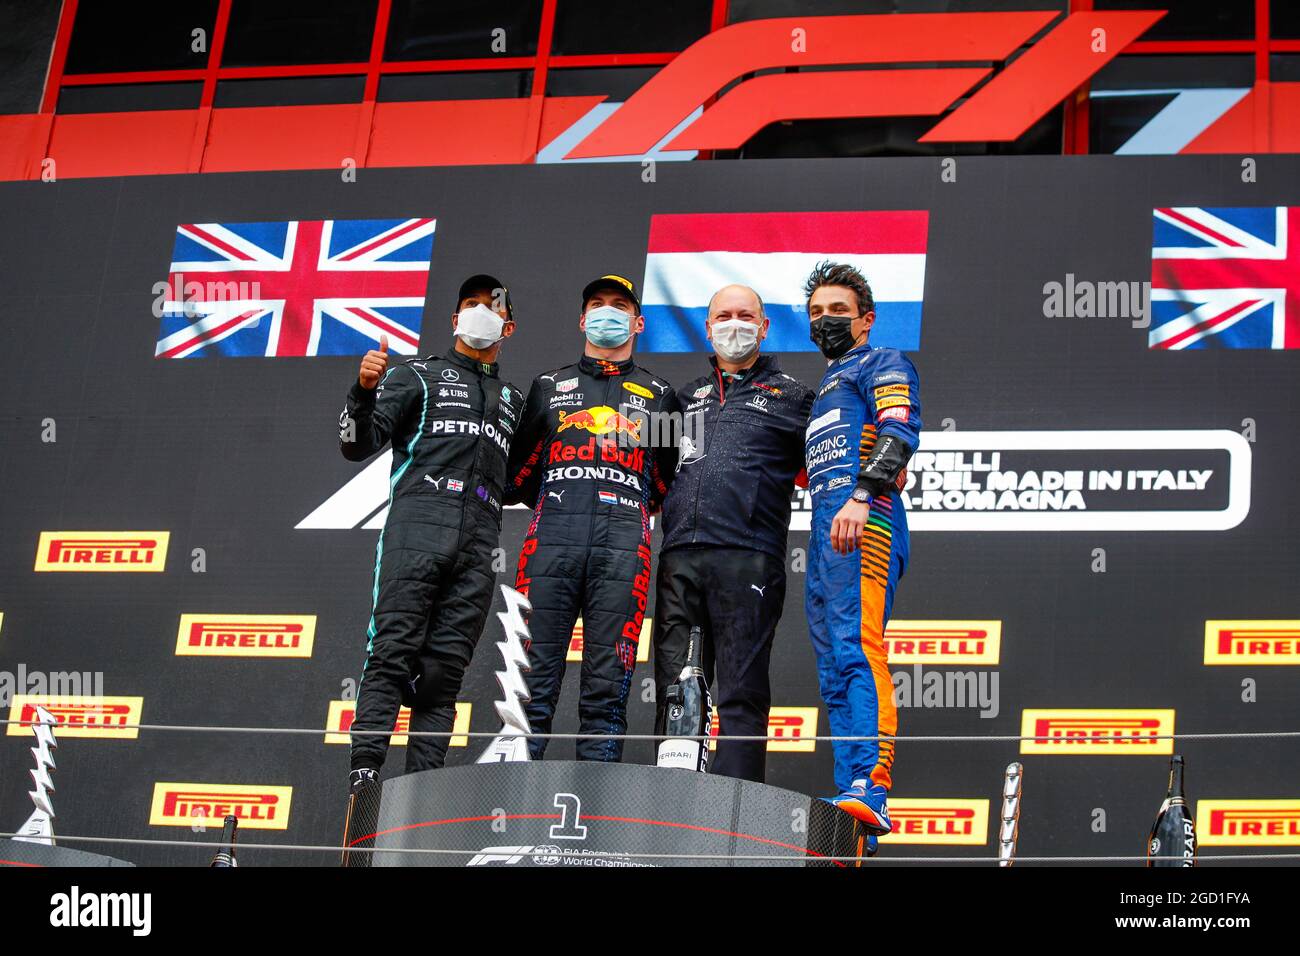 The podium (L to R): Lewis Hamilton (GBR) Mercedes AMG F1, second; Max Verstappen (NLD) Red Bull Racing, race winner; Karl Sengstbratl, Red Bull Racing Finance & Operations Director; Lando Norris (GBR) McLaren, third. Emilia Romagna Grand Prix, Sunday 18th April 2021. Imola, Italy. FIA Pool Image for Editorial Use Only Stock Photo